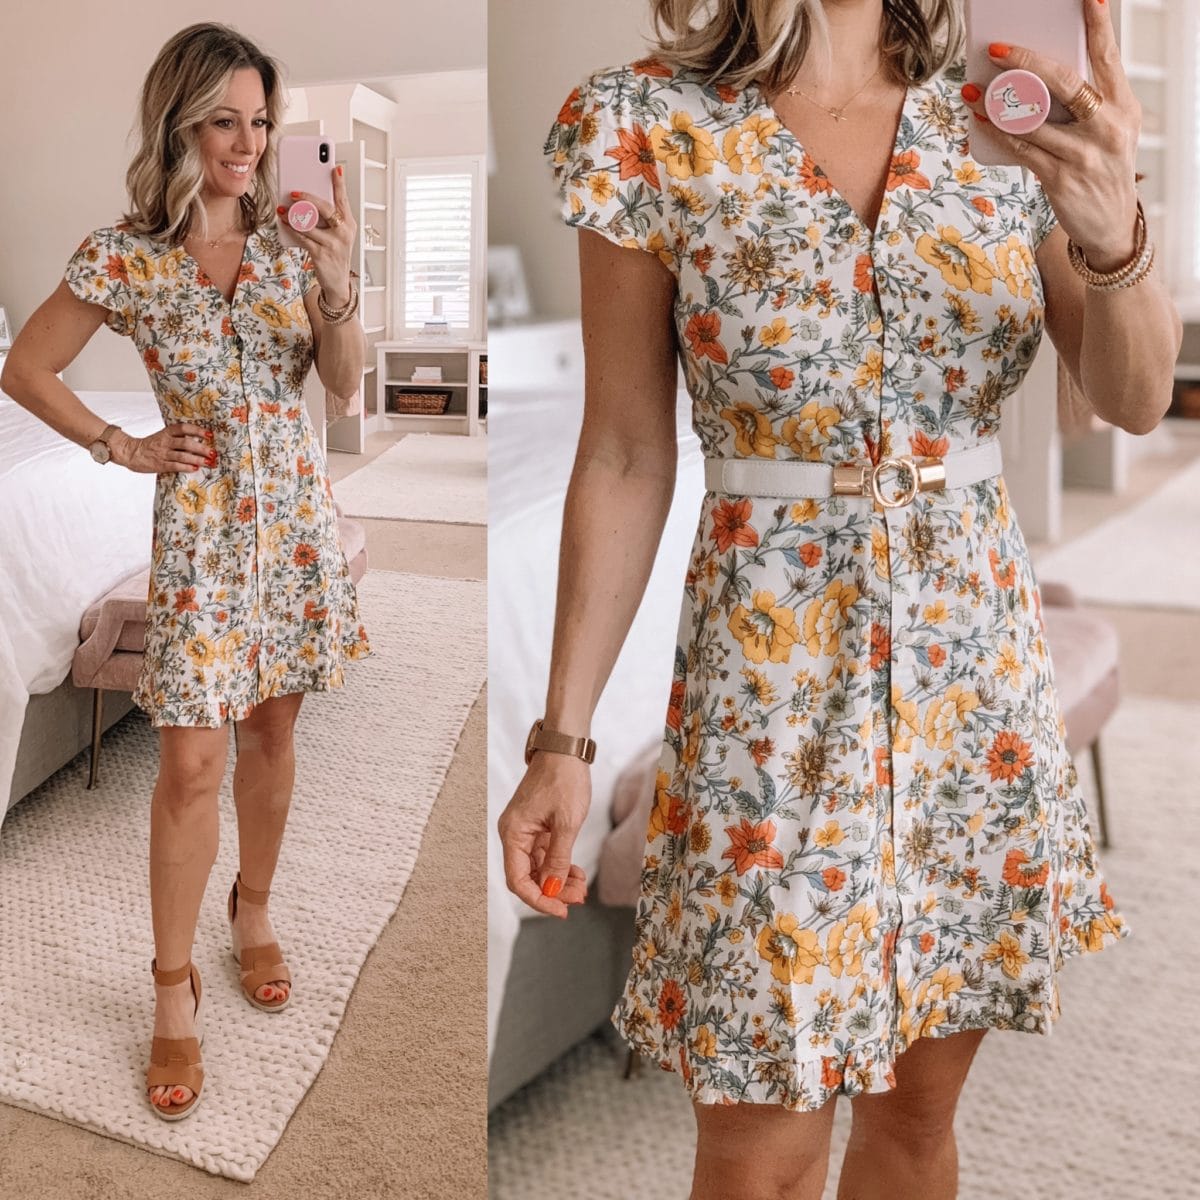 Floral Dress, Wedges, White and Gold Belt